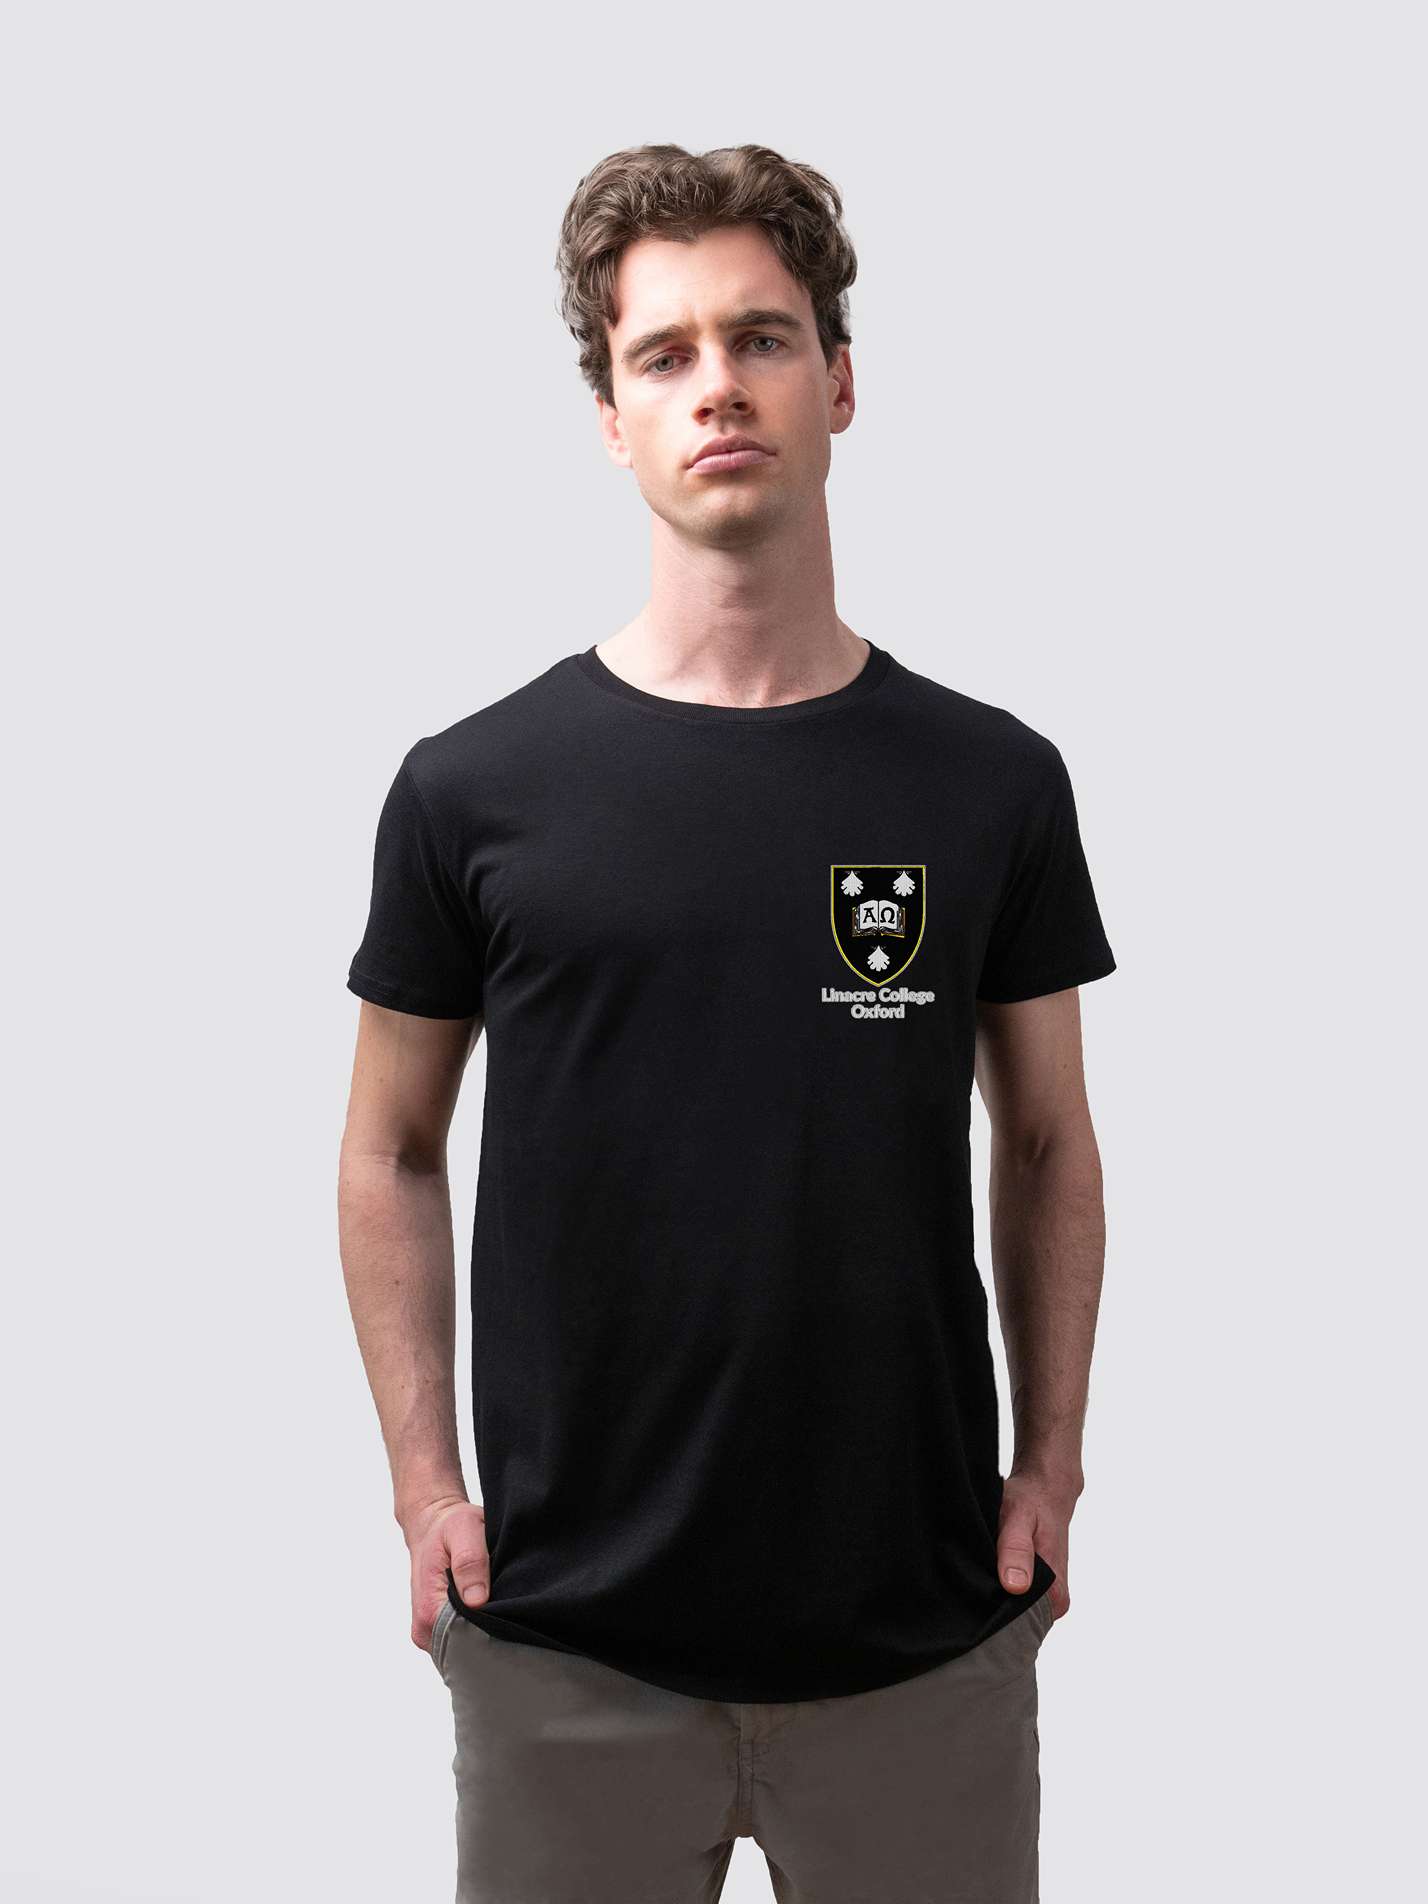 Sustainable Linacre t-shirt, made from organic cotton